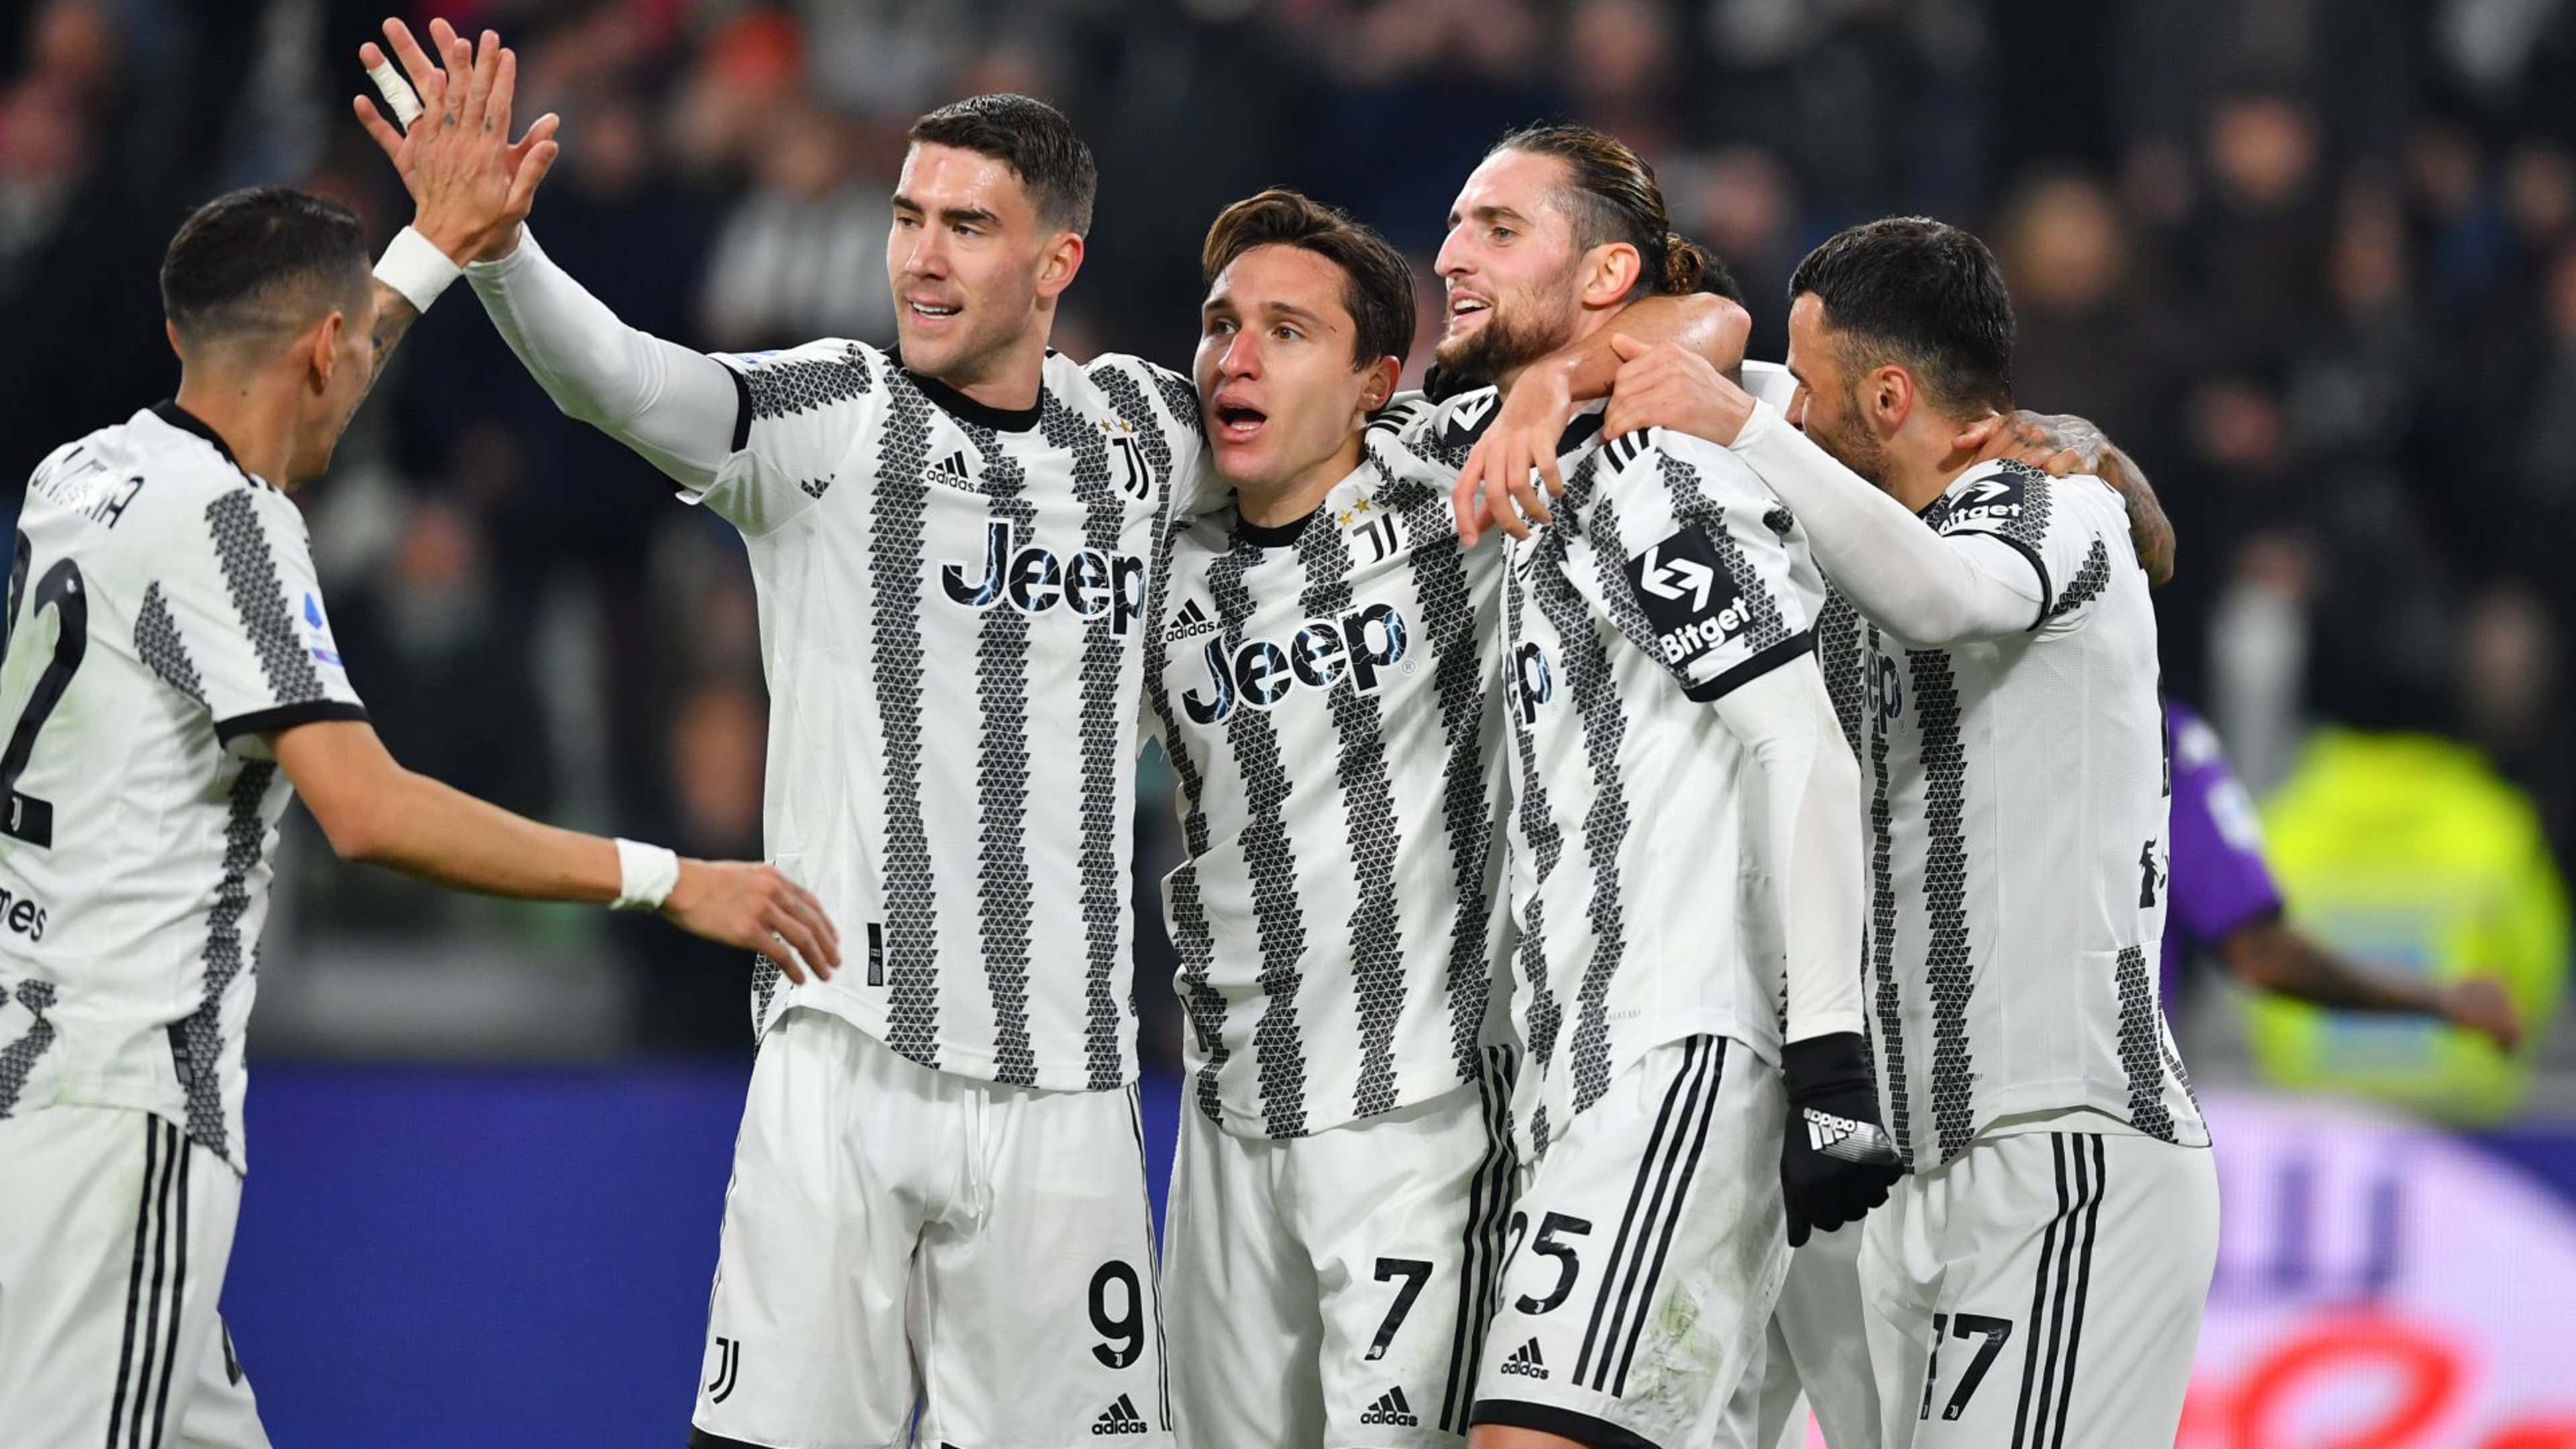 Freiburg vs Juventus: Live stream, TV channel, kick-off time & where to  watch